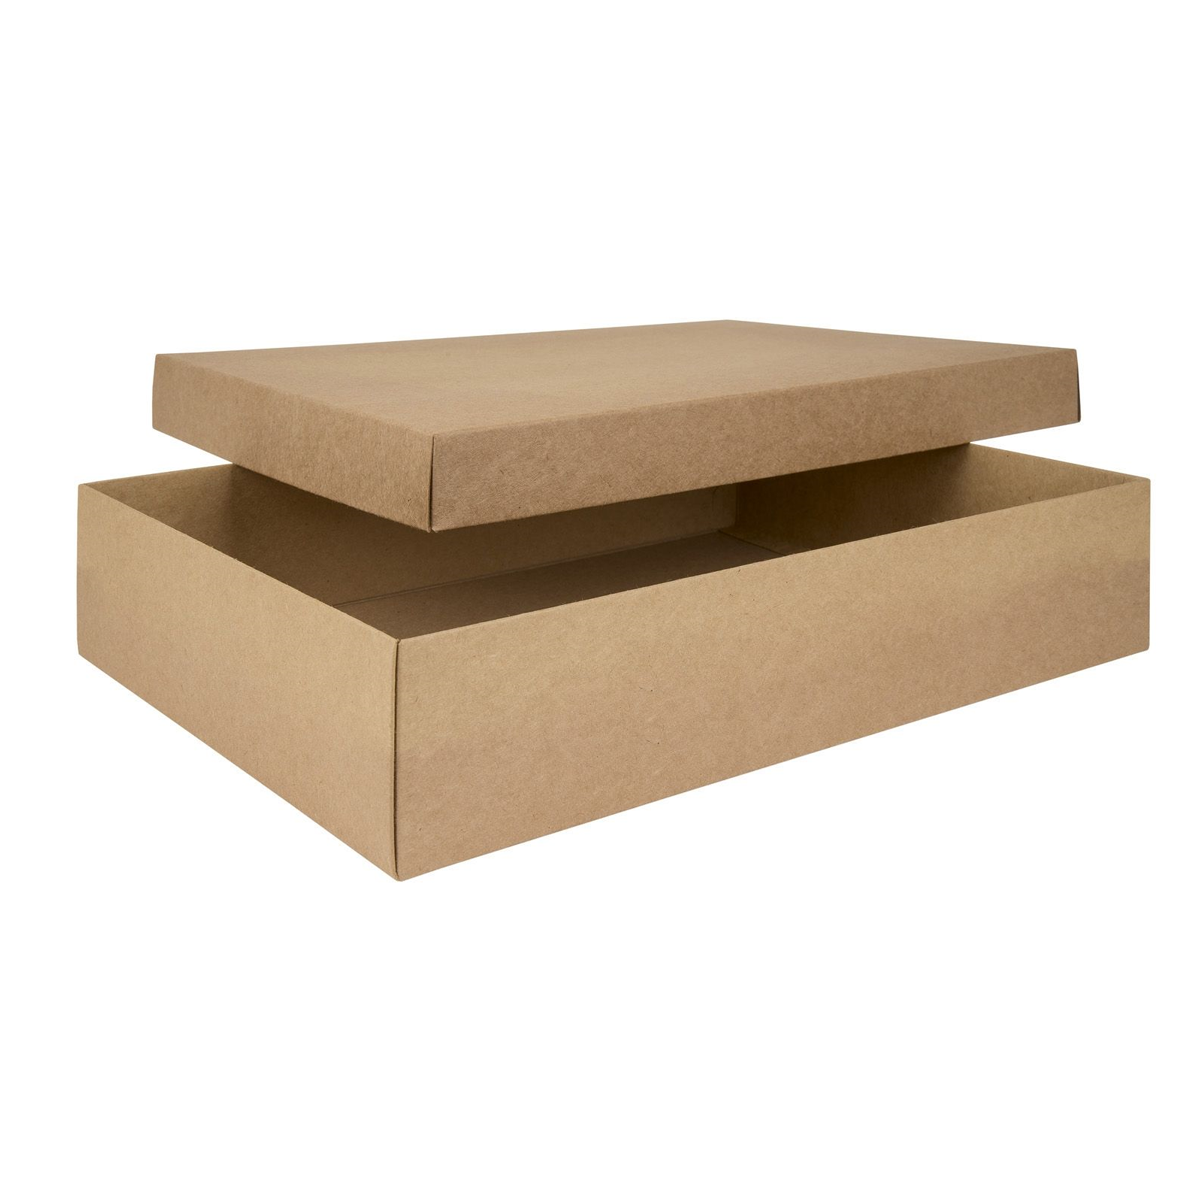 Willow Cardboard Gift Box with Lids, for Clothes, 12Pc Pack Size 37.5x26.5x7Cms - Brown Kraft